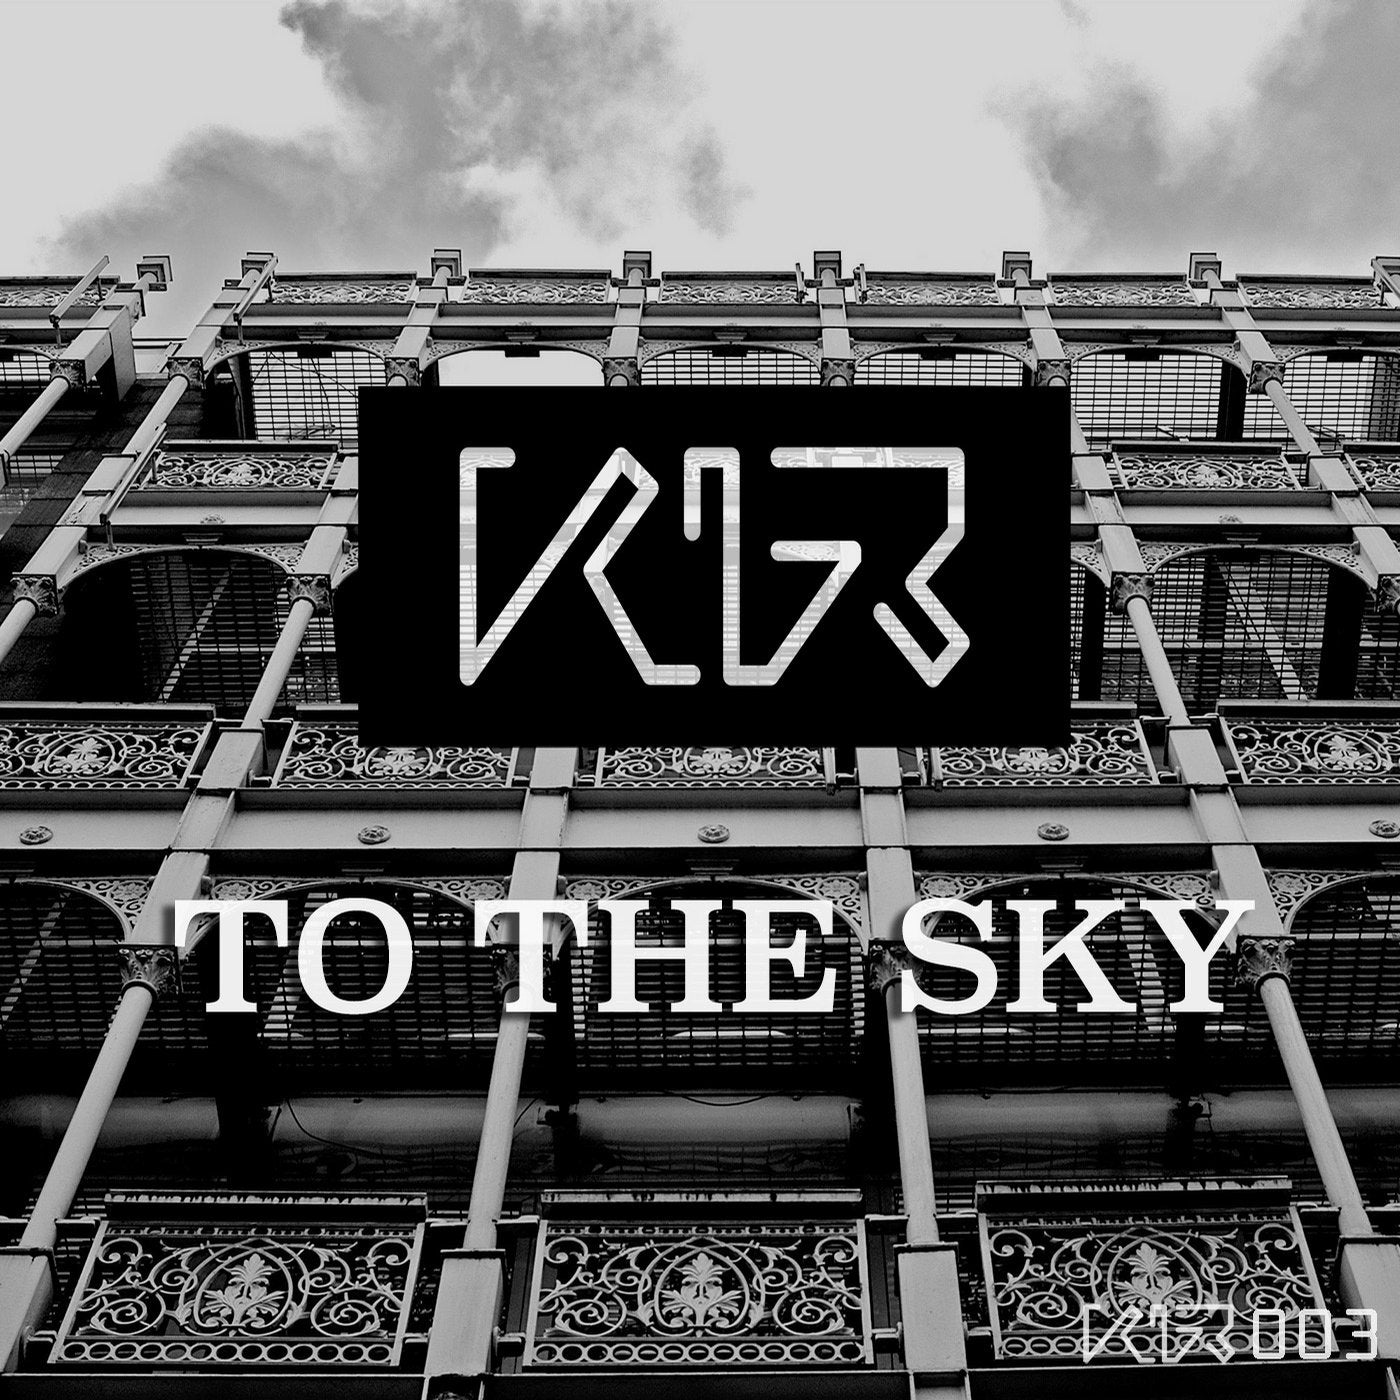 To the Sky